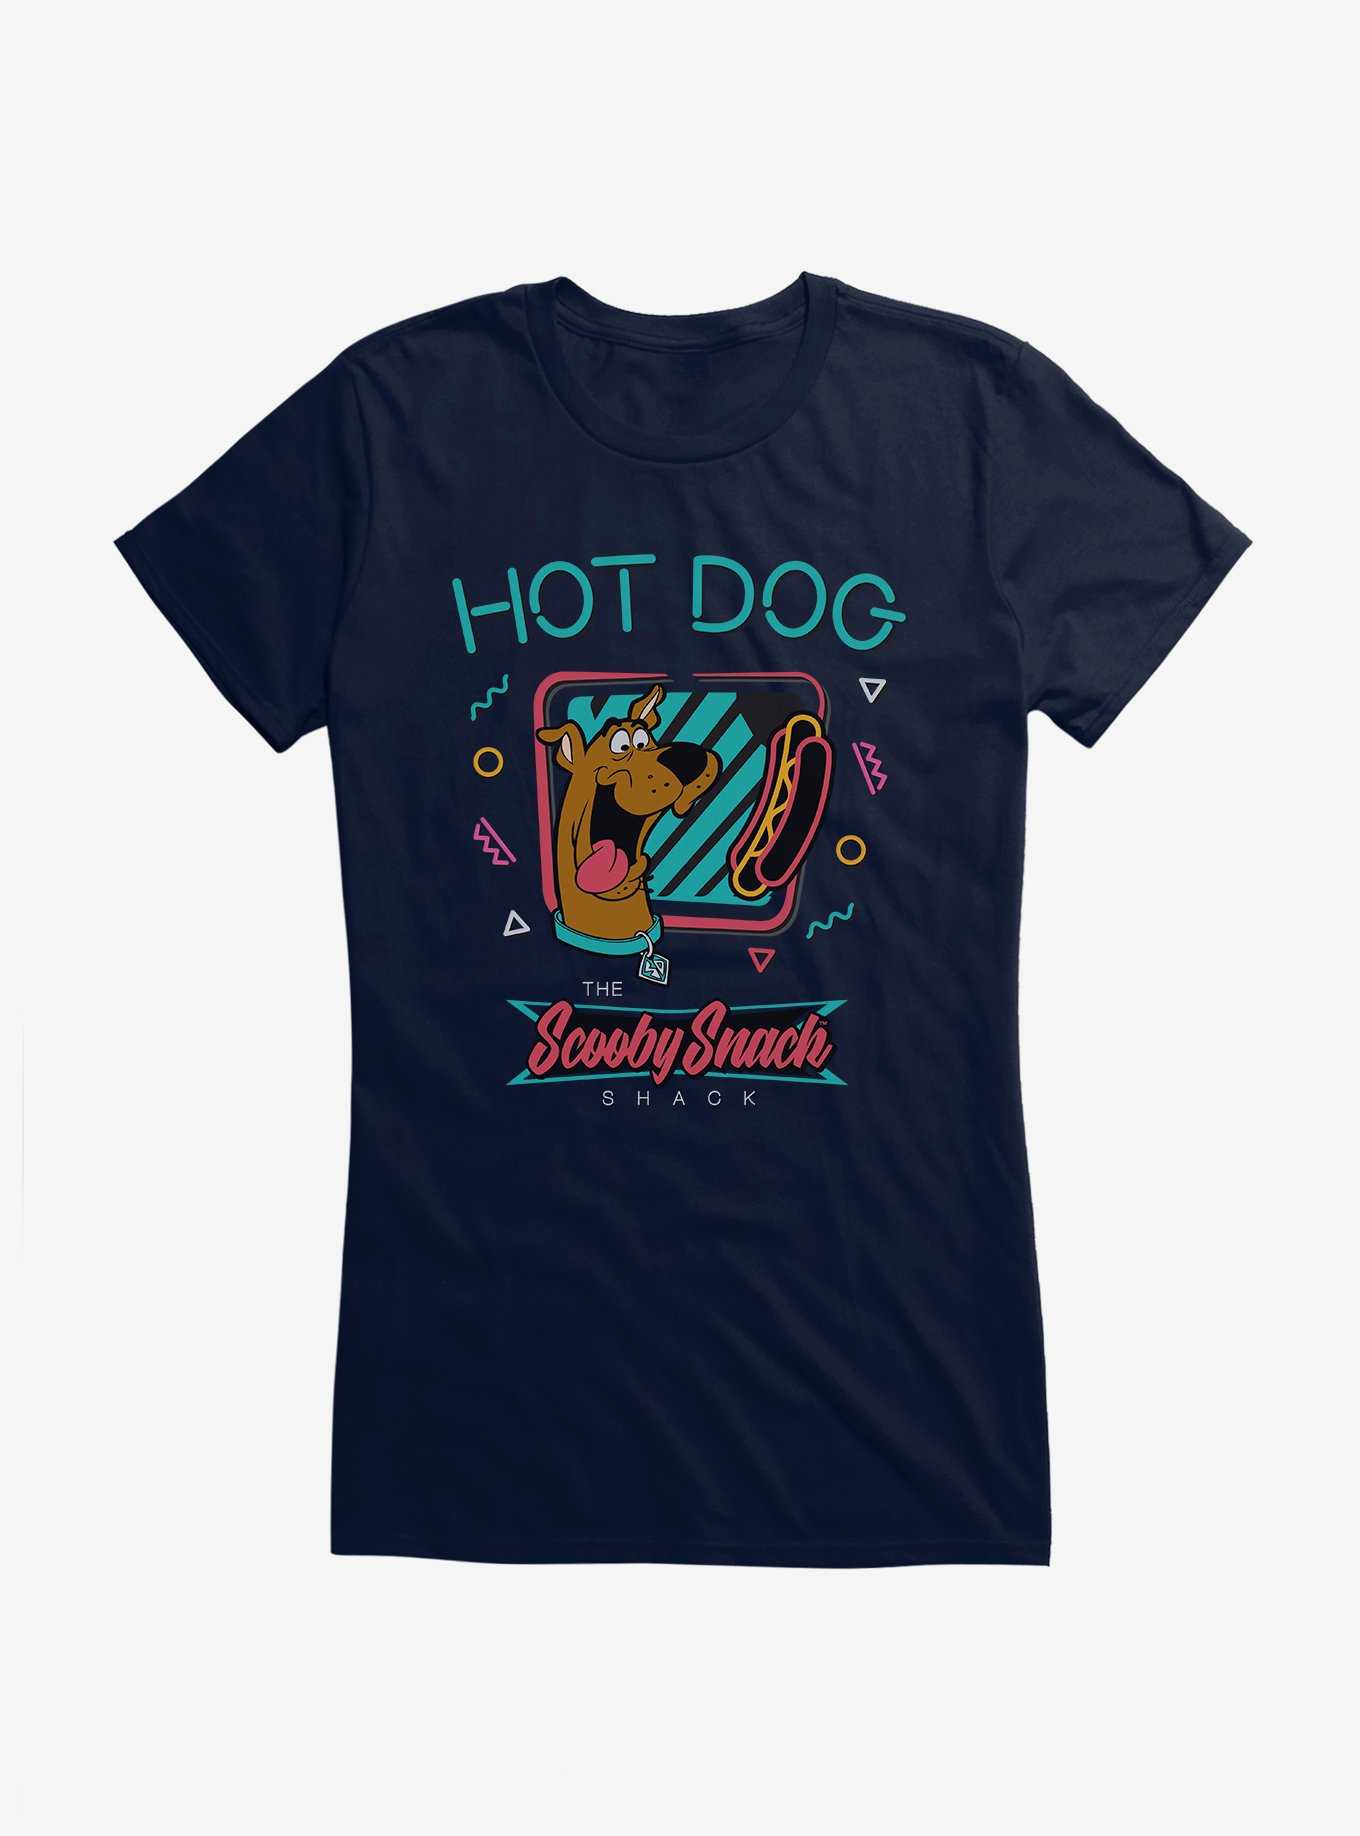 Scooby-Doo Hot Dog Scooby Snack Girls T-Shirt, , hi-res